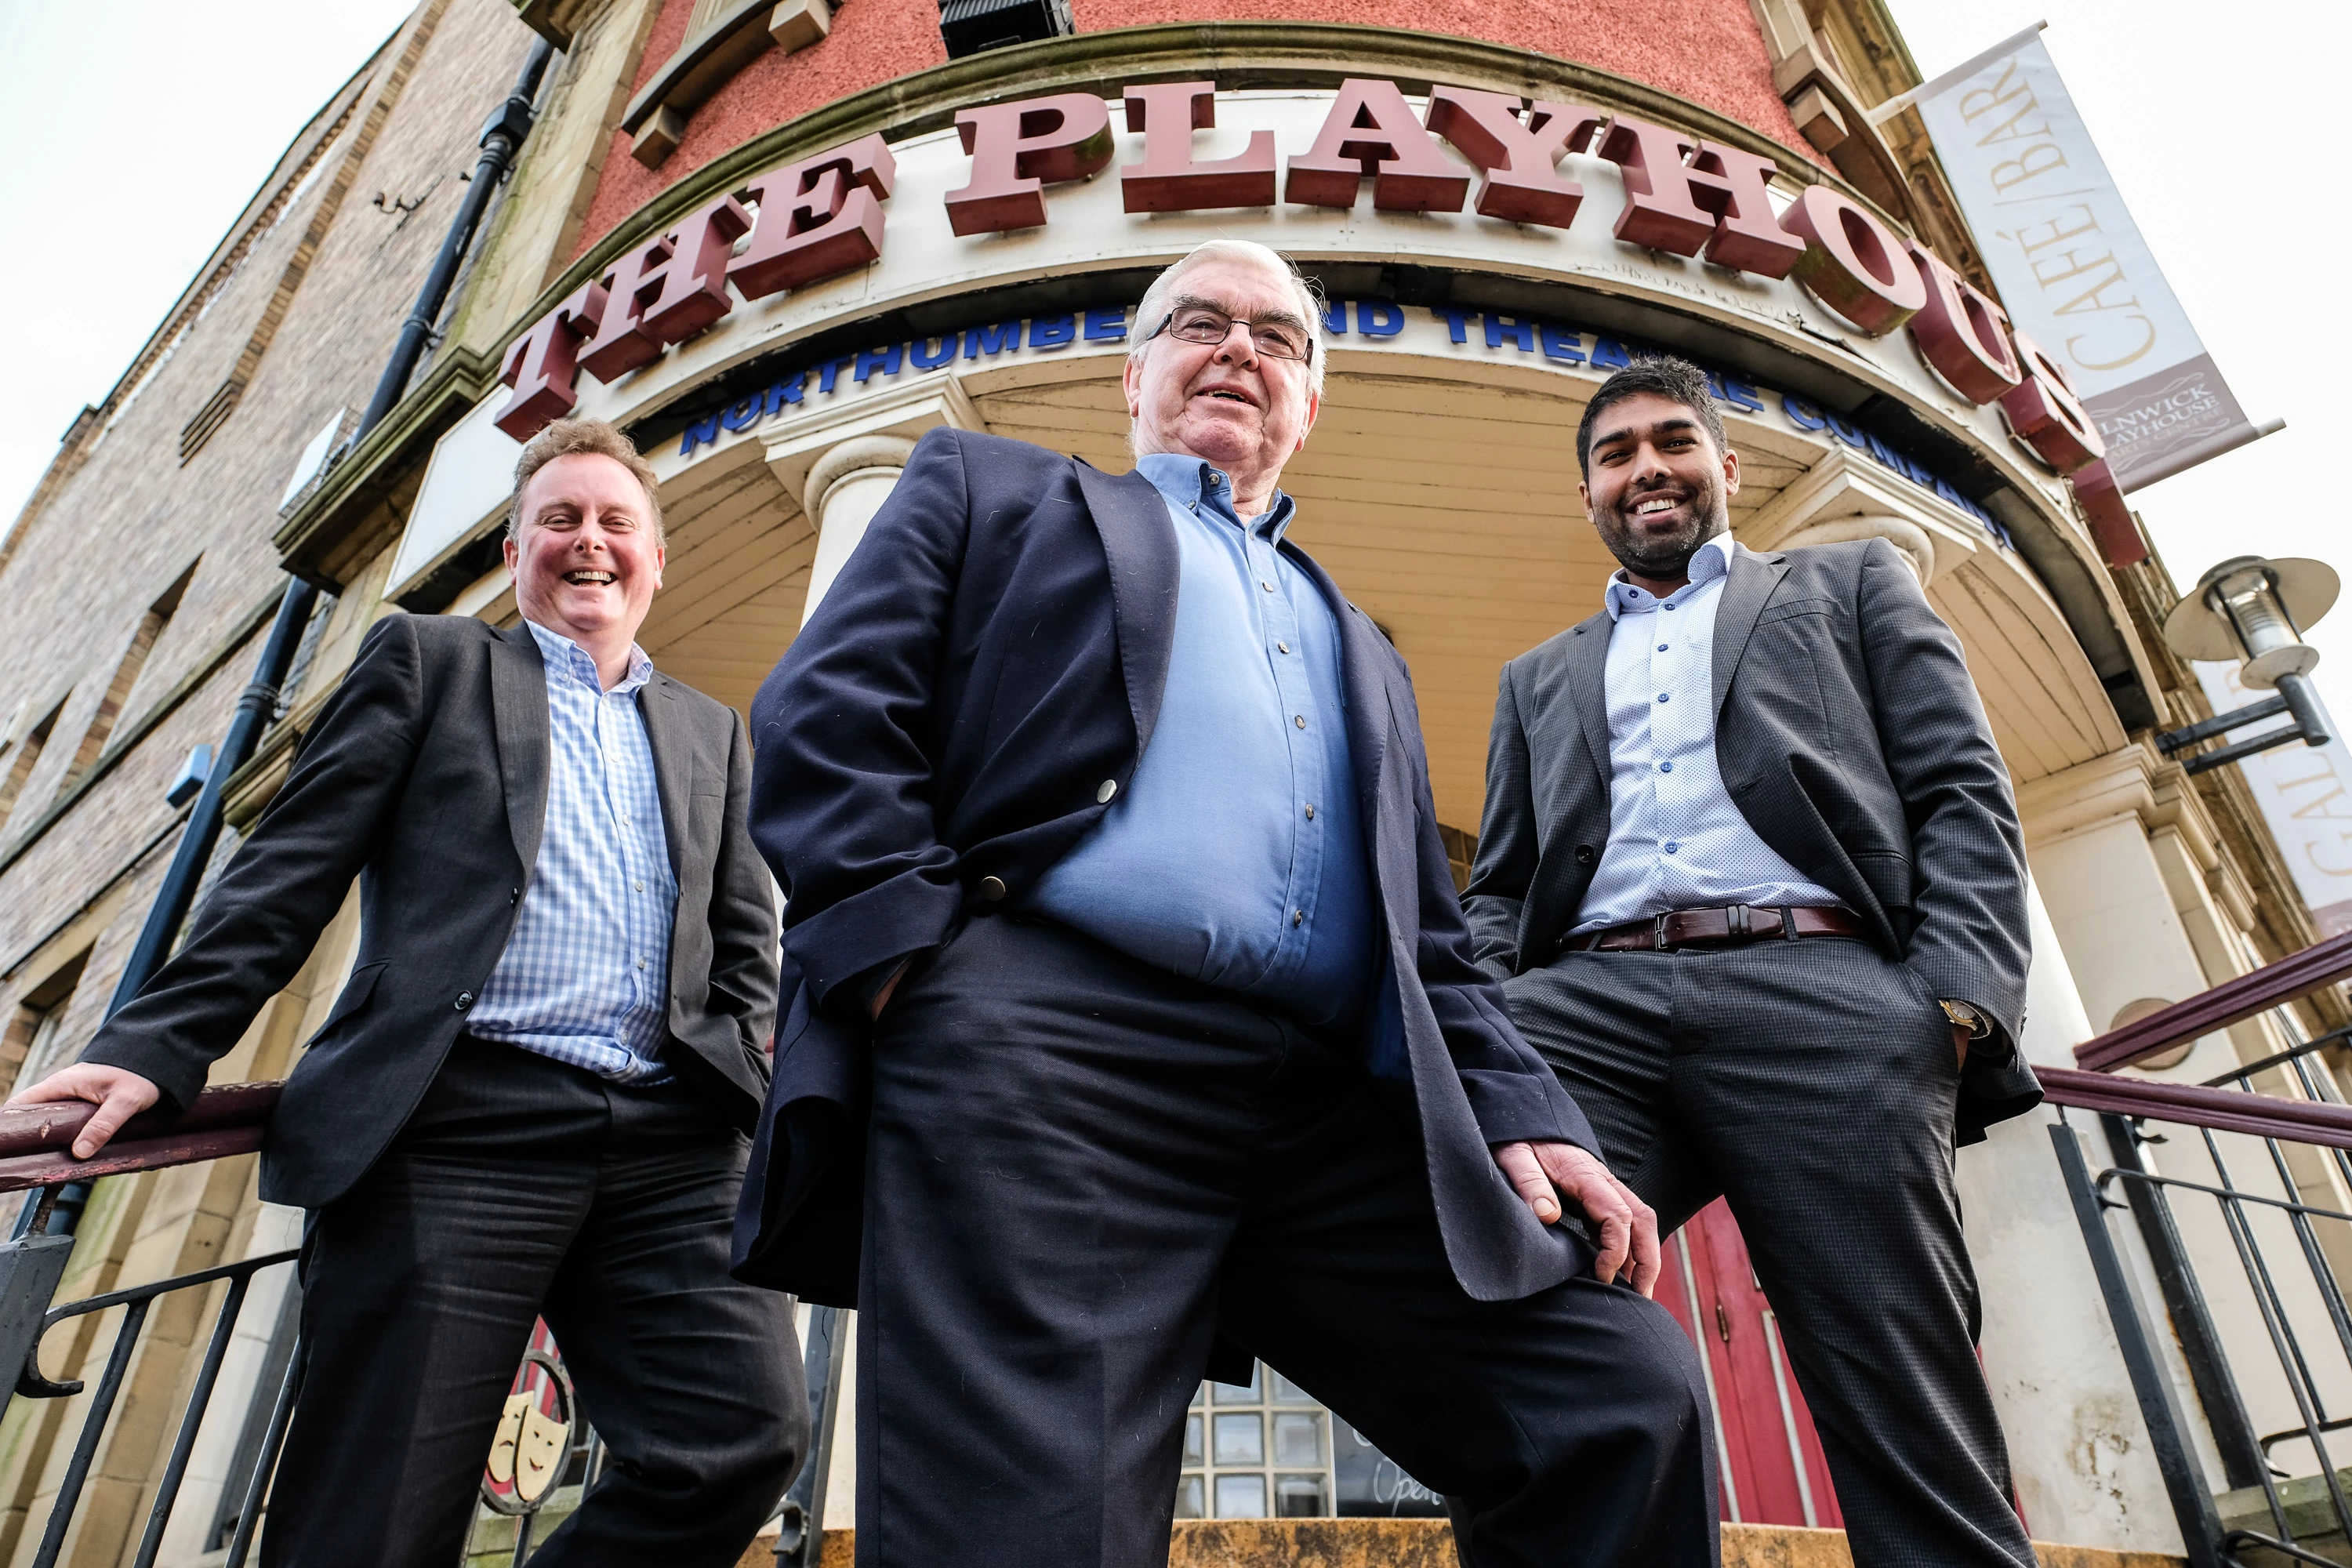 Bryan Ellis of Northumberland Theatre Company (centre) with Peter Millican (left) and Ricky Handa of Peter Millican Law on the steps of the Alnwick Playhouse 